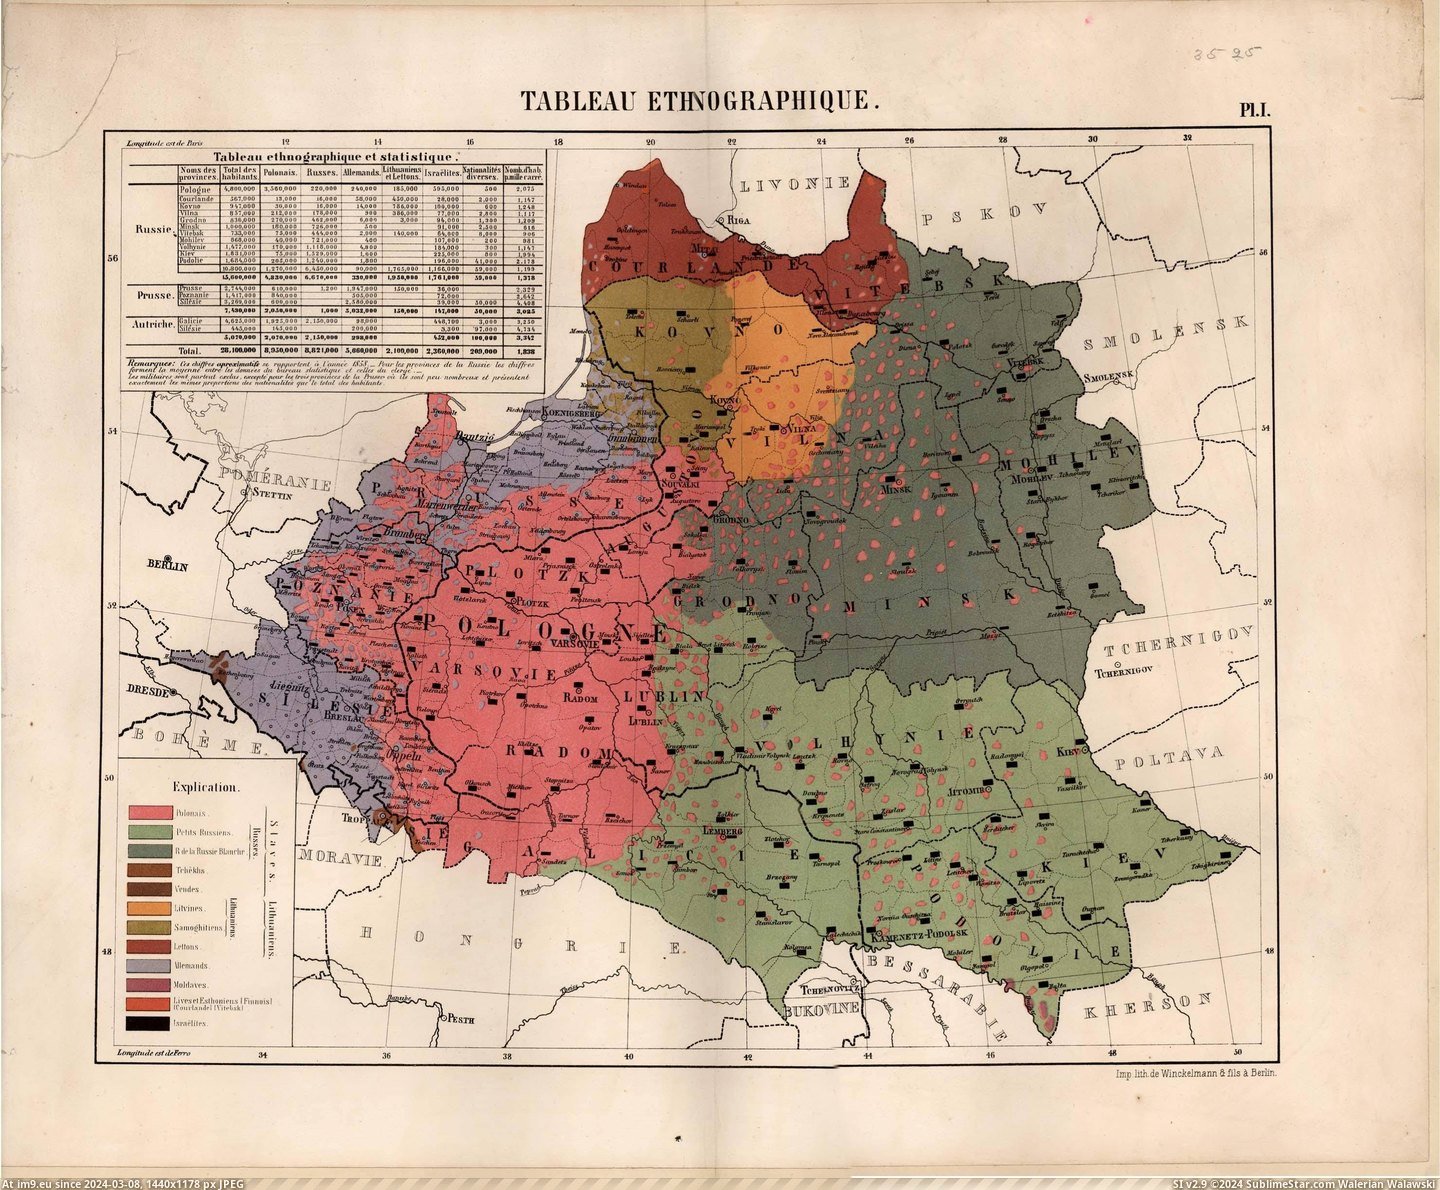 #Map #Poland #Partitioned #Statistics #Ethnographic [Mapporn] Ethnographic Map and Statistics of Partitioned Poland, 1858 [2959×2432] Pic. (Image of album My r/MAPS favs))